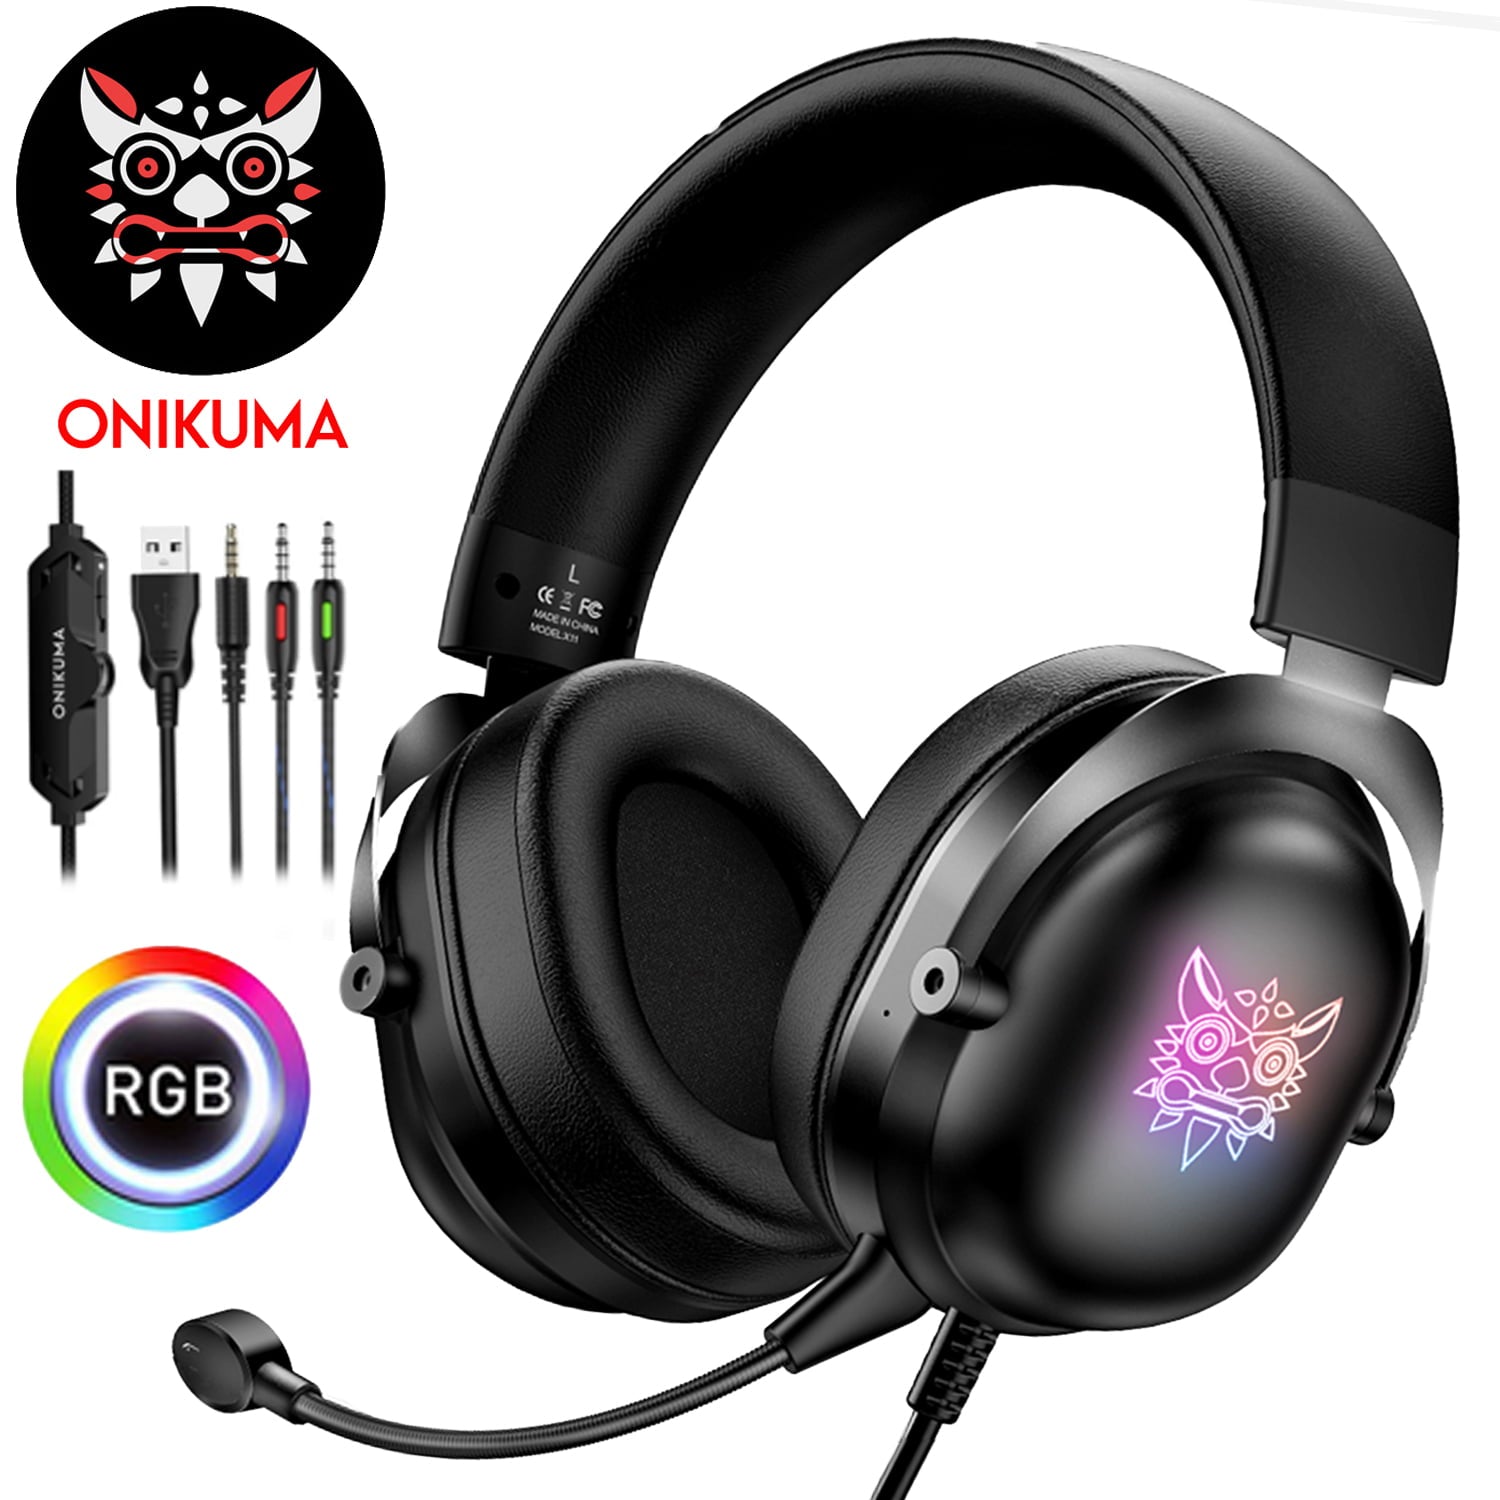 Gaming Headset with Microphone, ONIKUMA Stereo Surround Sound Gaming Headphones, Noise Cancelling RGB Headsets for Xbox One, PS5, Nintendo Switch, PC, Laptop, Mobile, X11